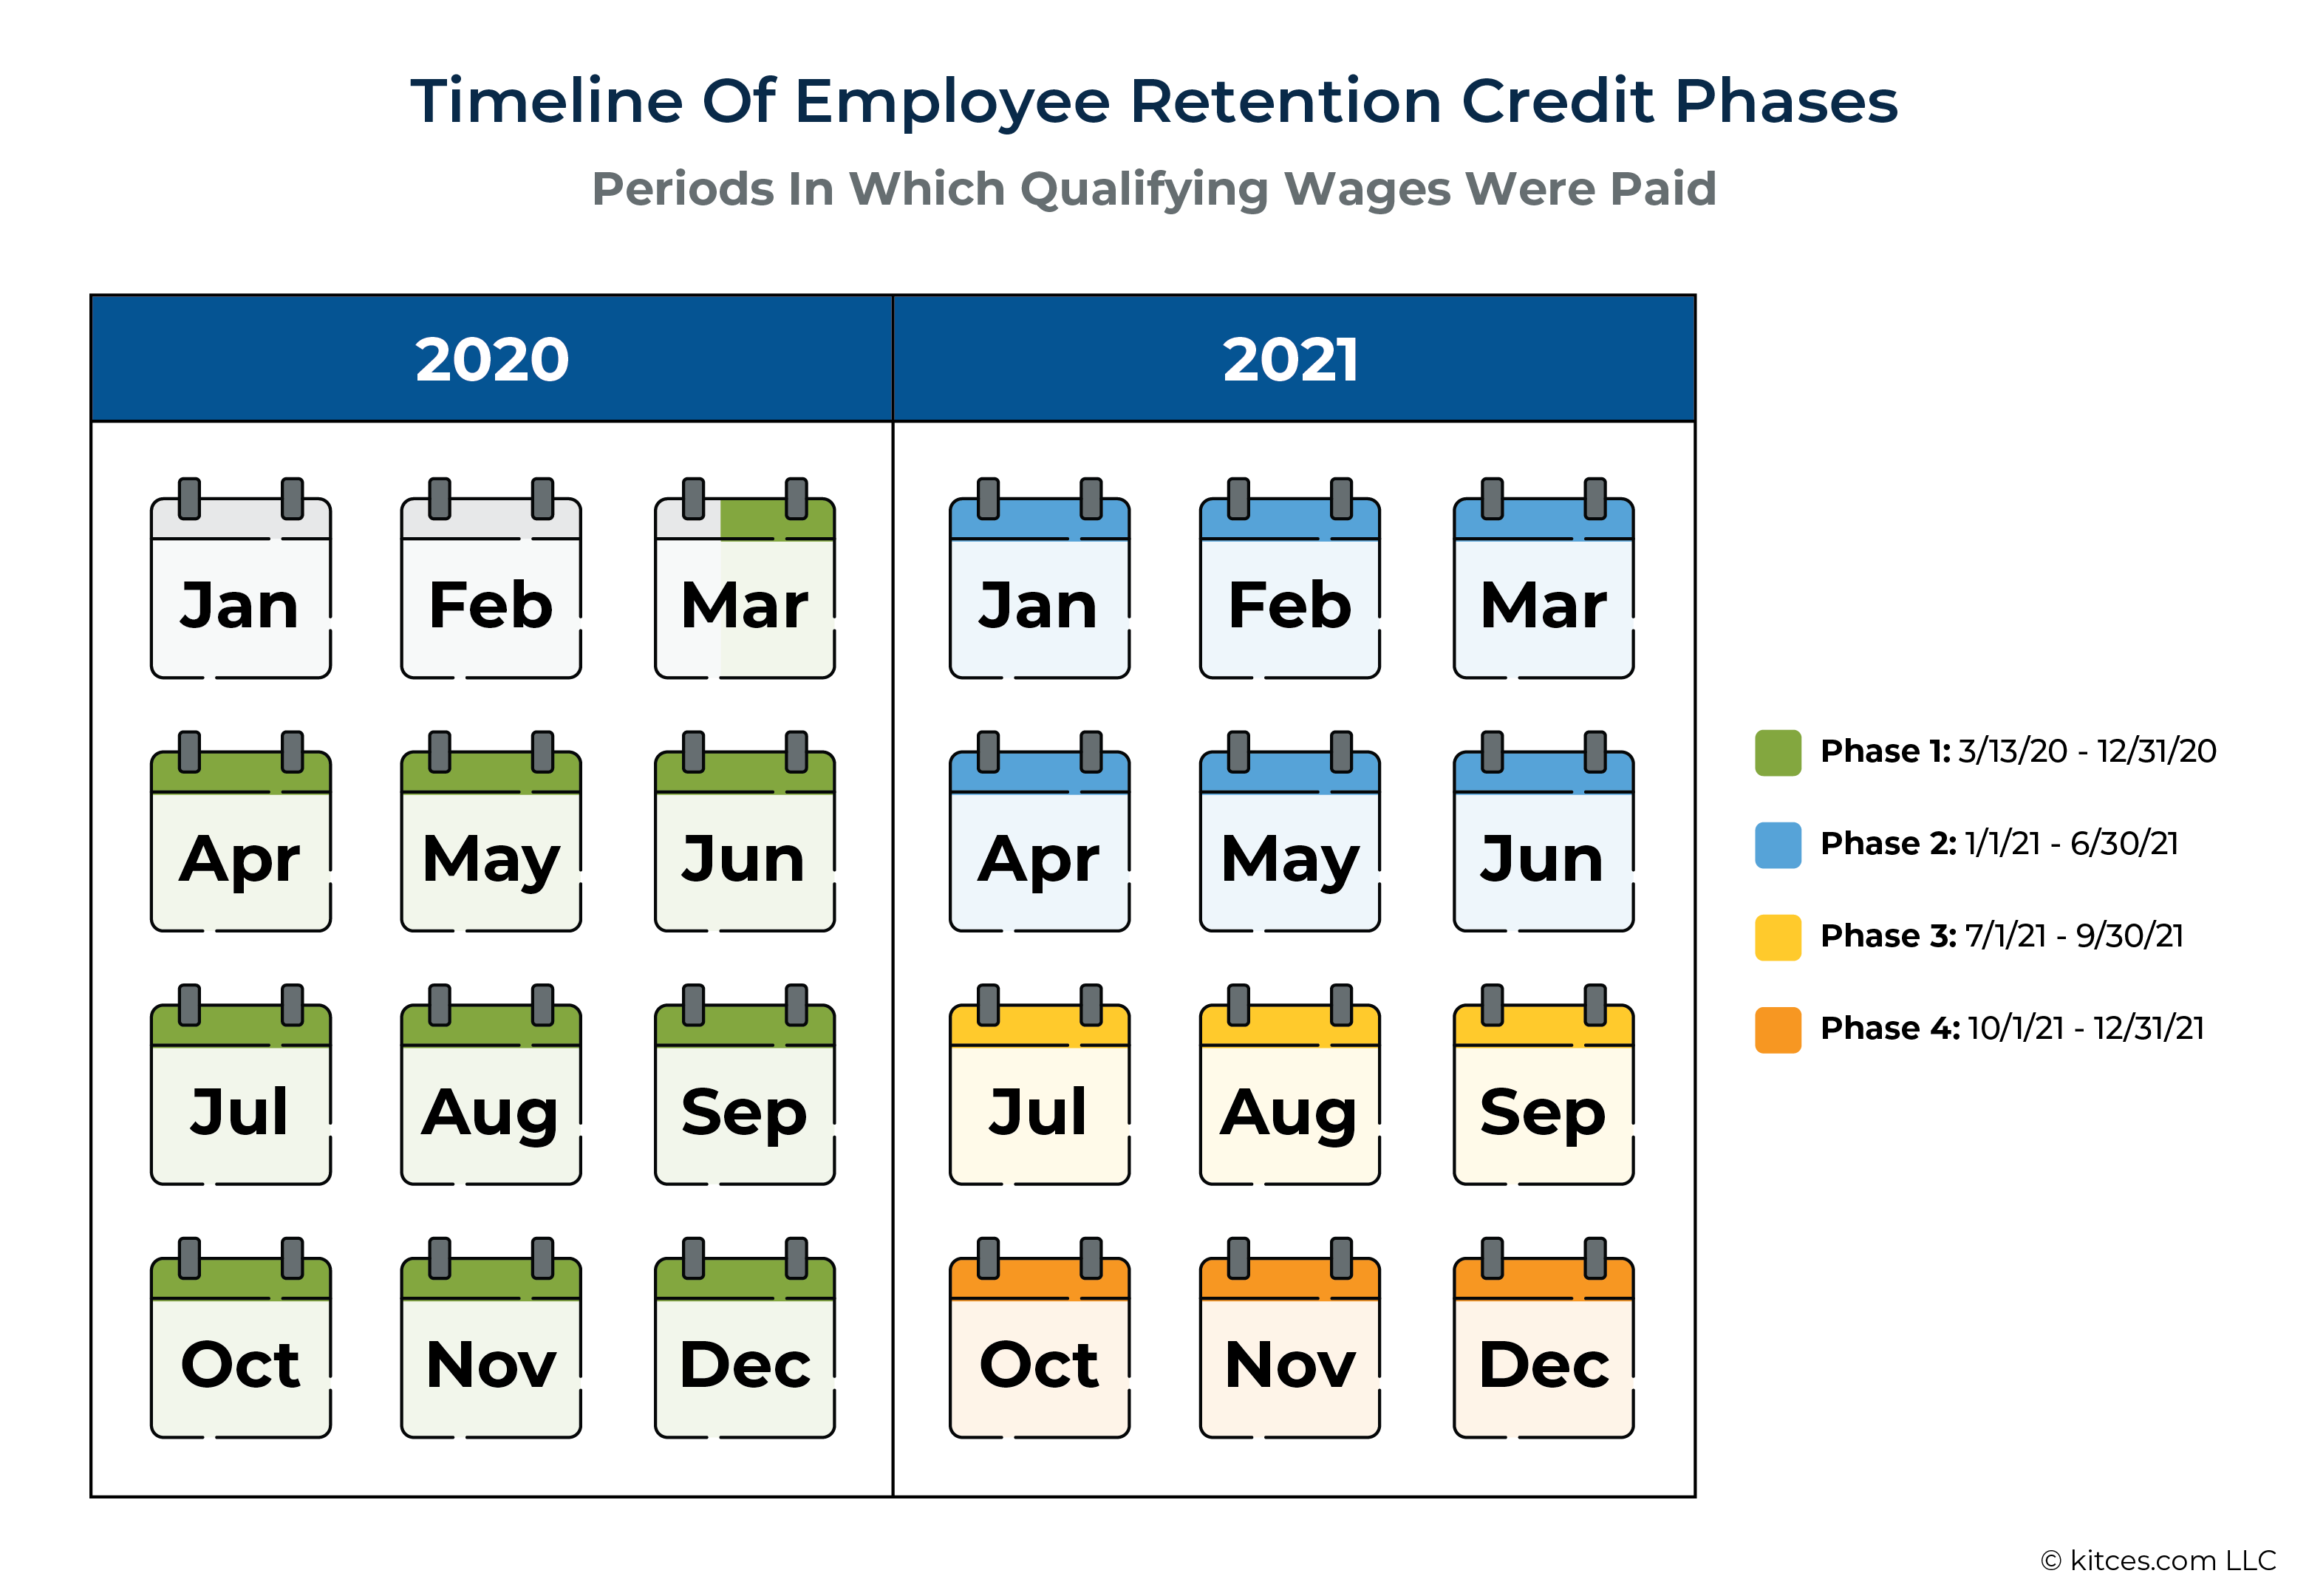 Timeline Of Employee Retention Credit Phases